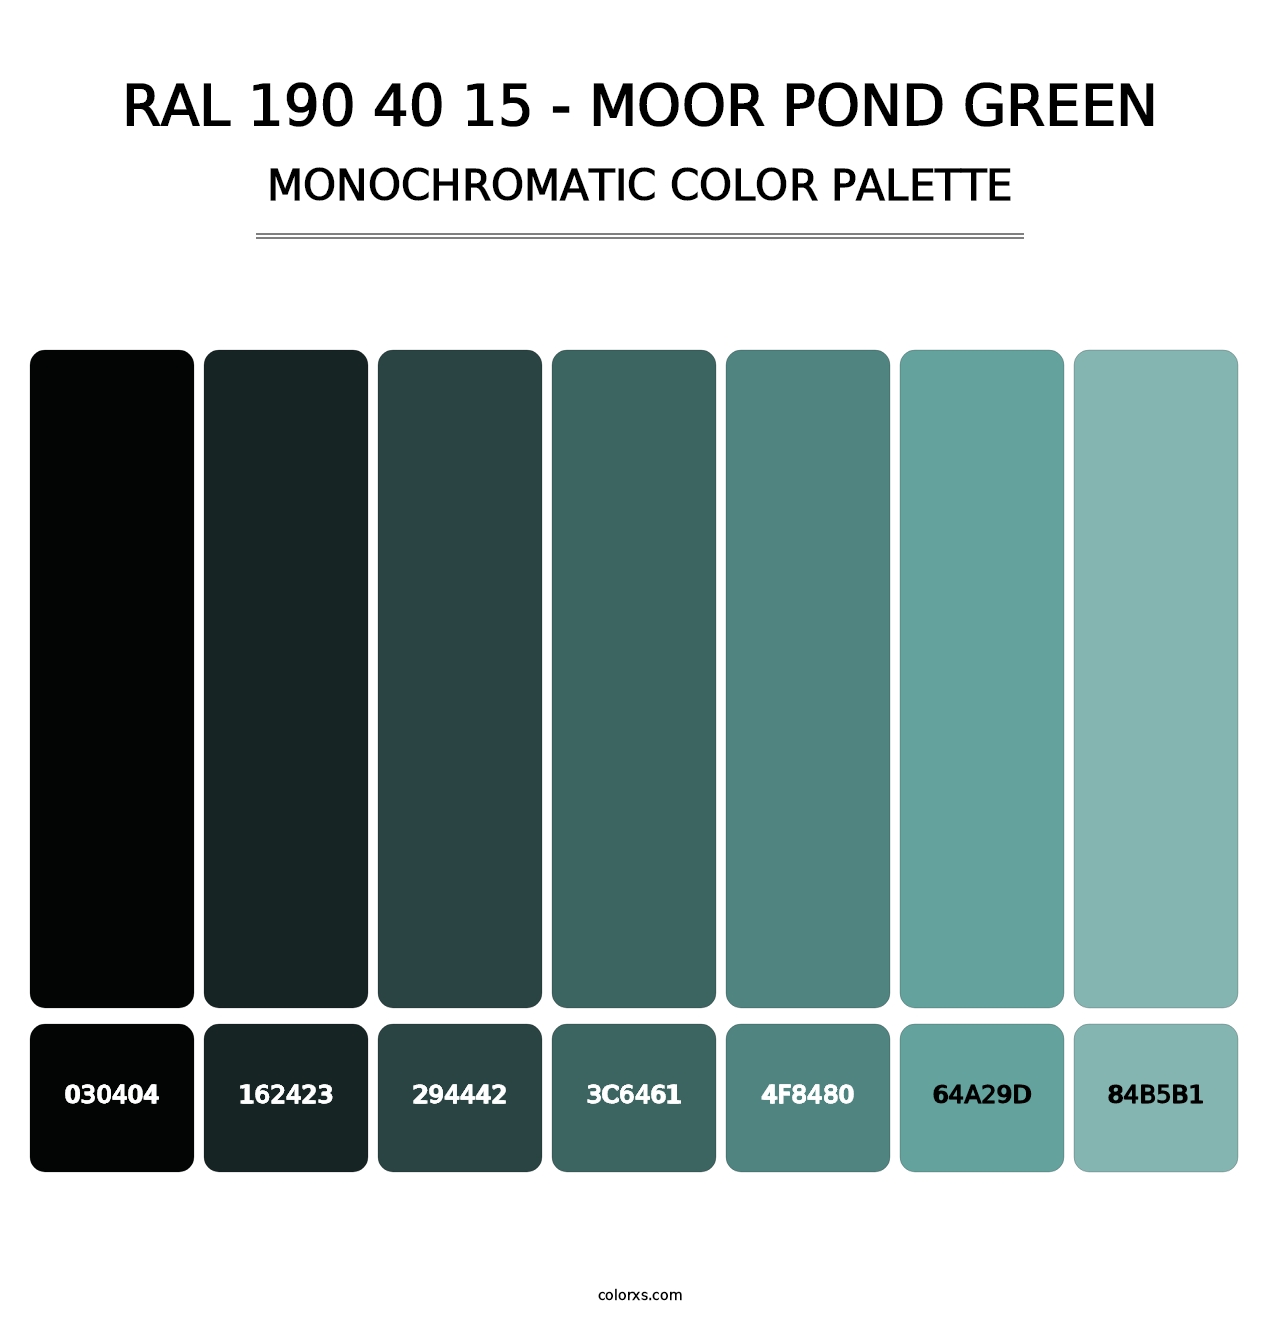 RAL 190 40 15 - Moor Pond Green - Monochromatic Color Palette